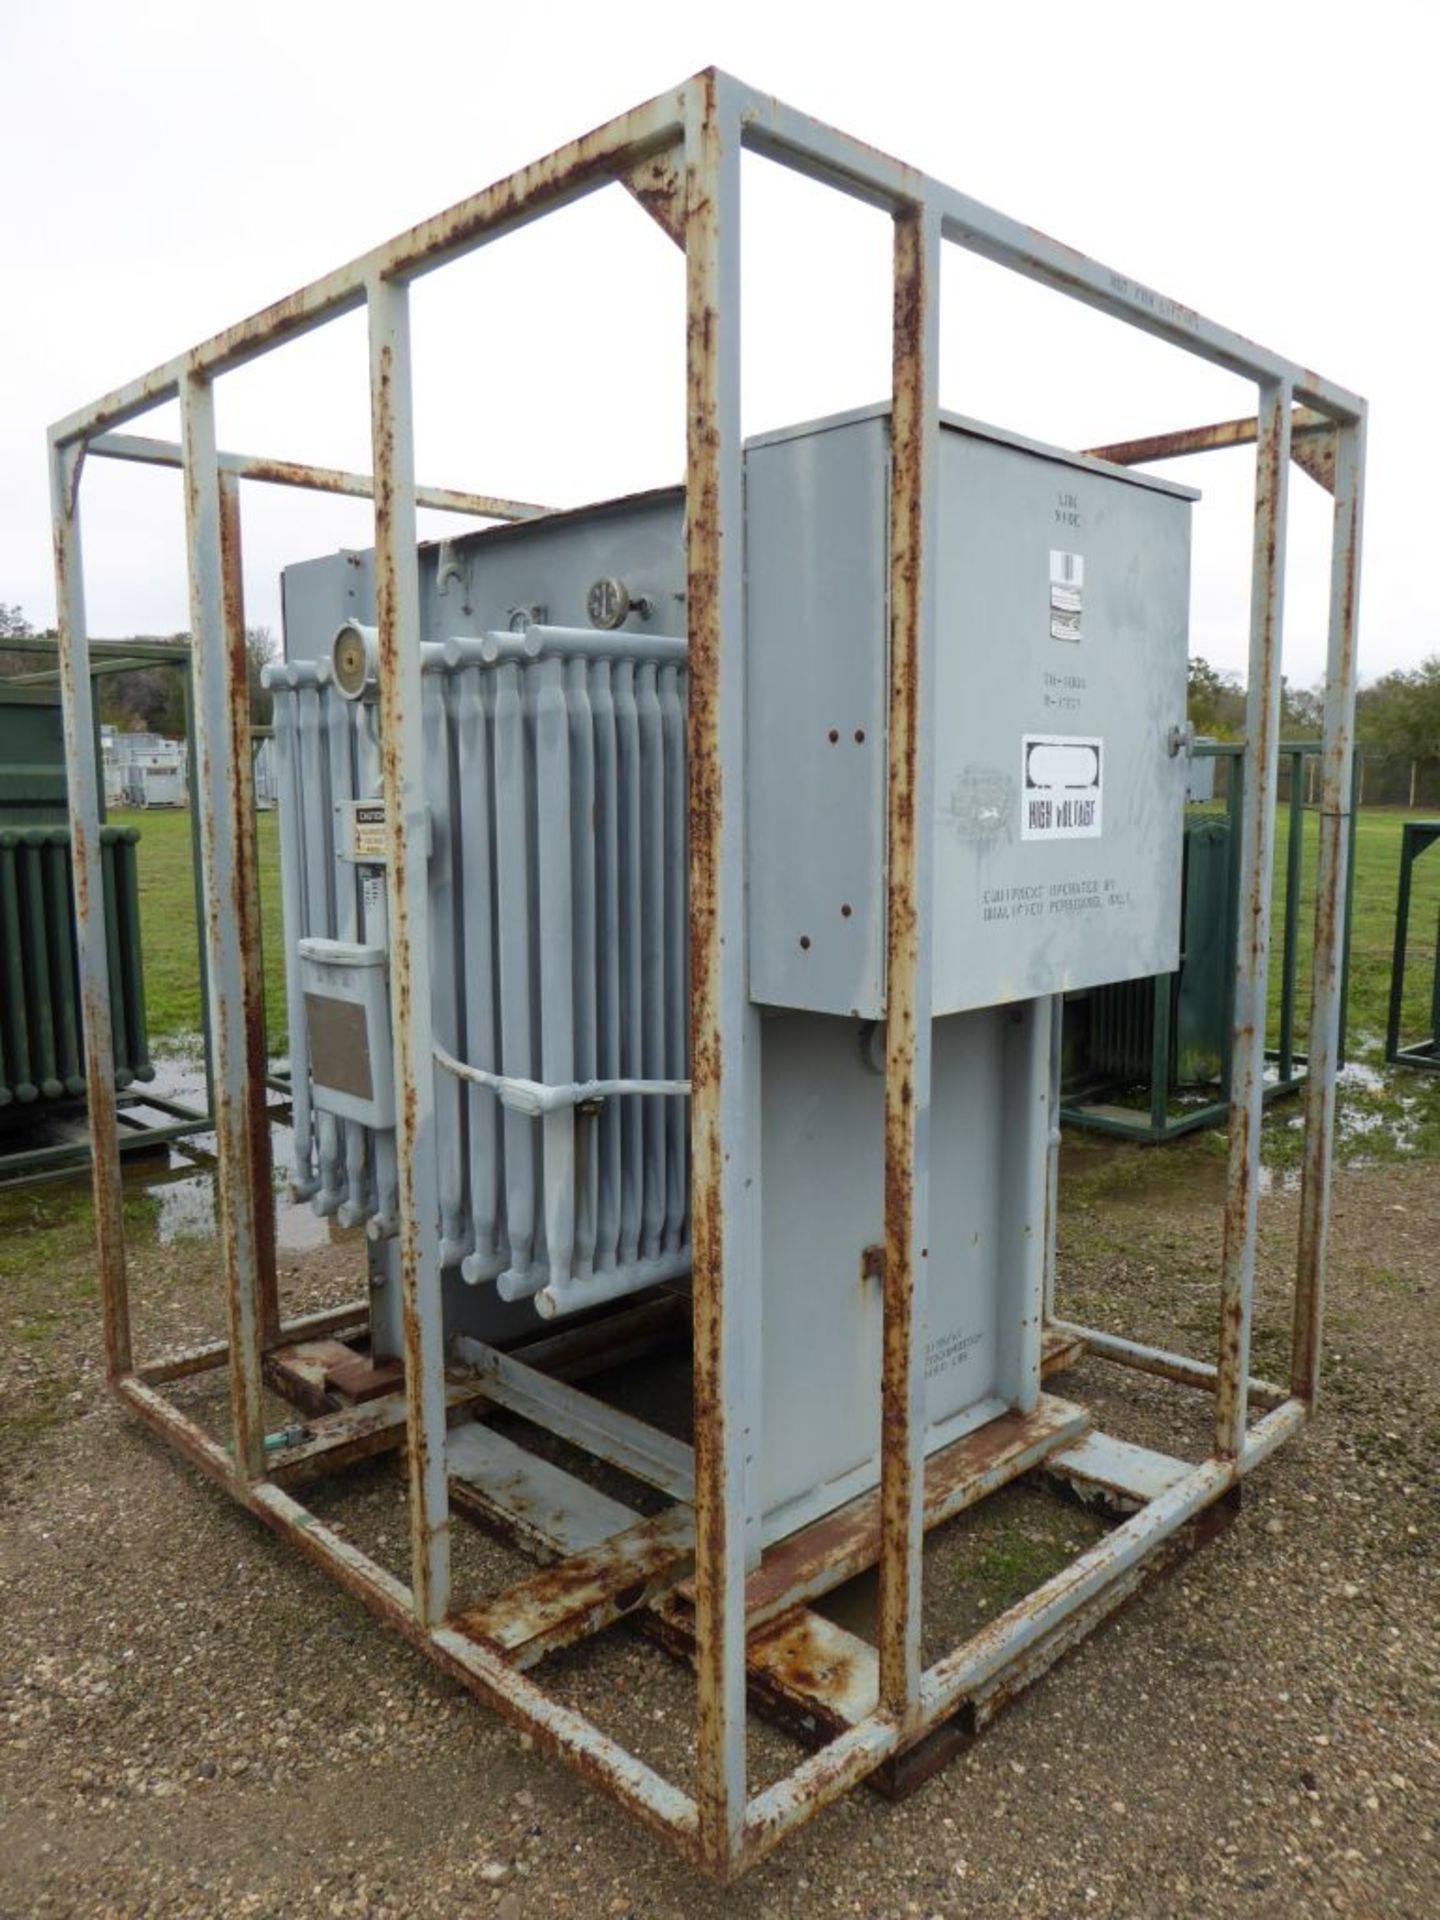 GE 1,000 KVA Transformer | Oil Report Included - See Lot Pictures